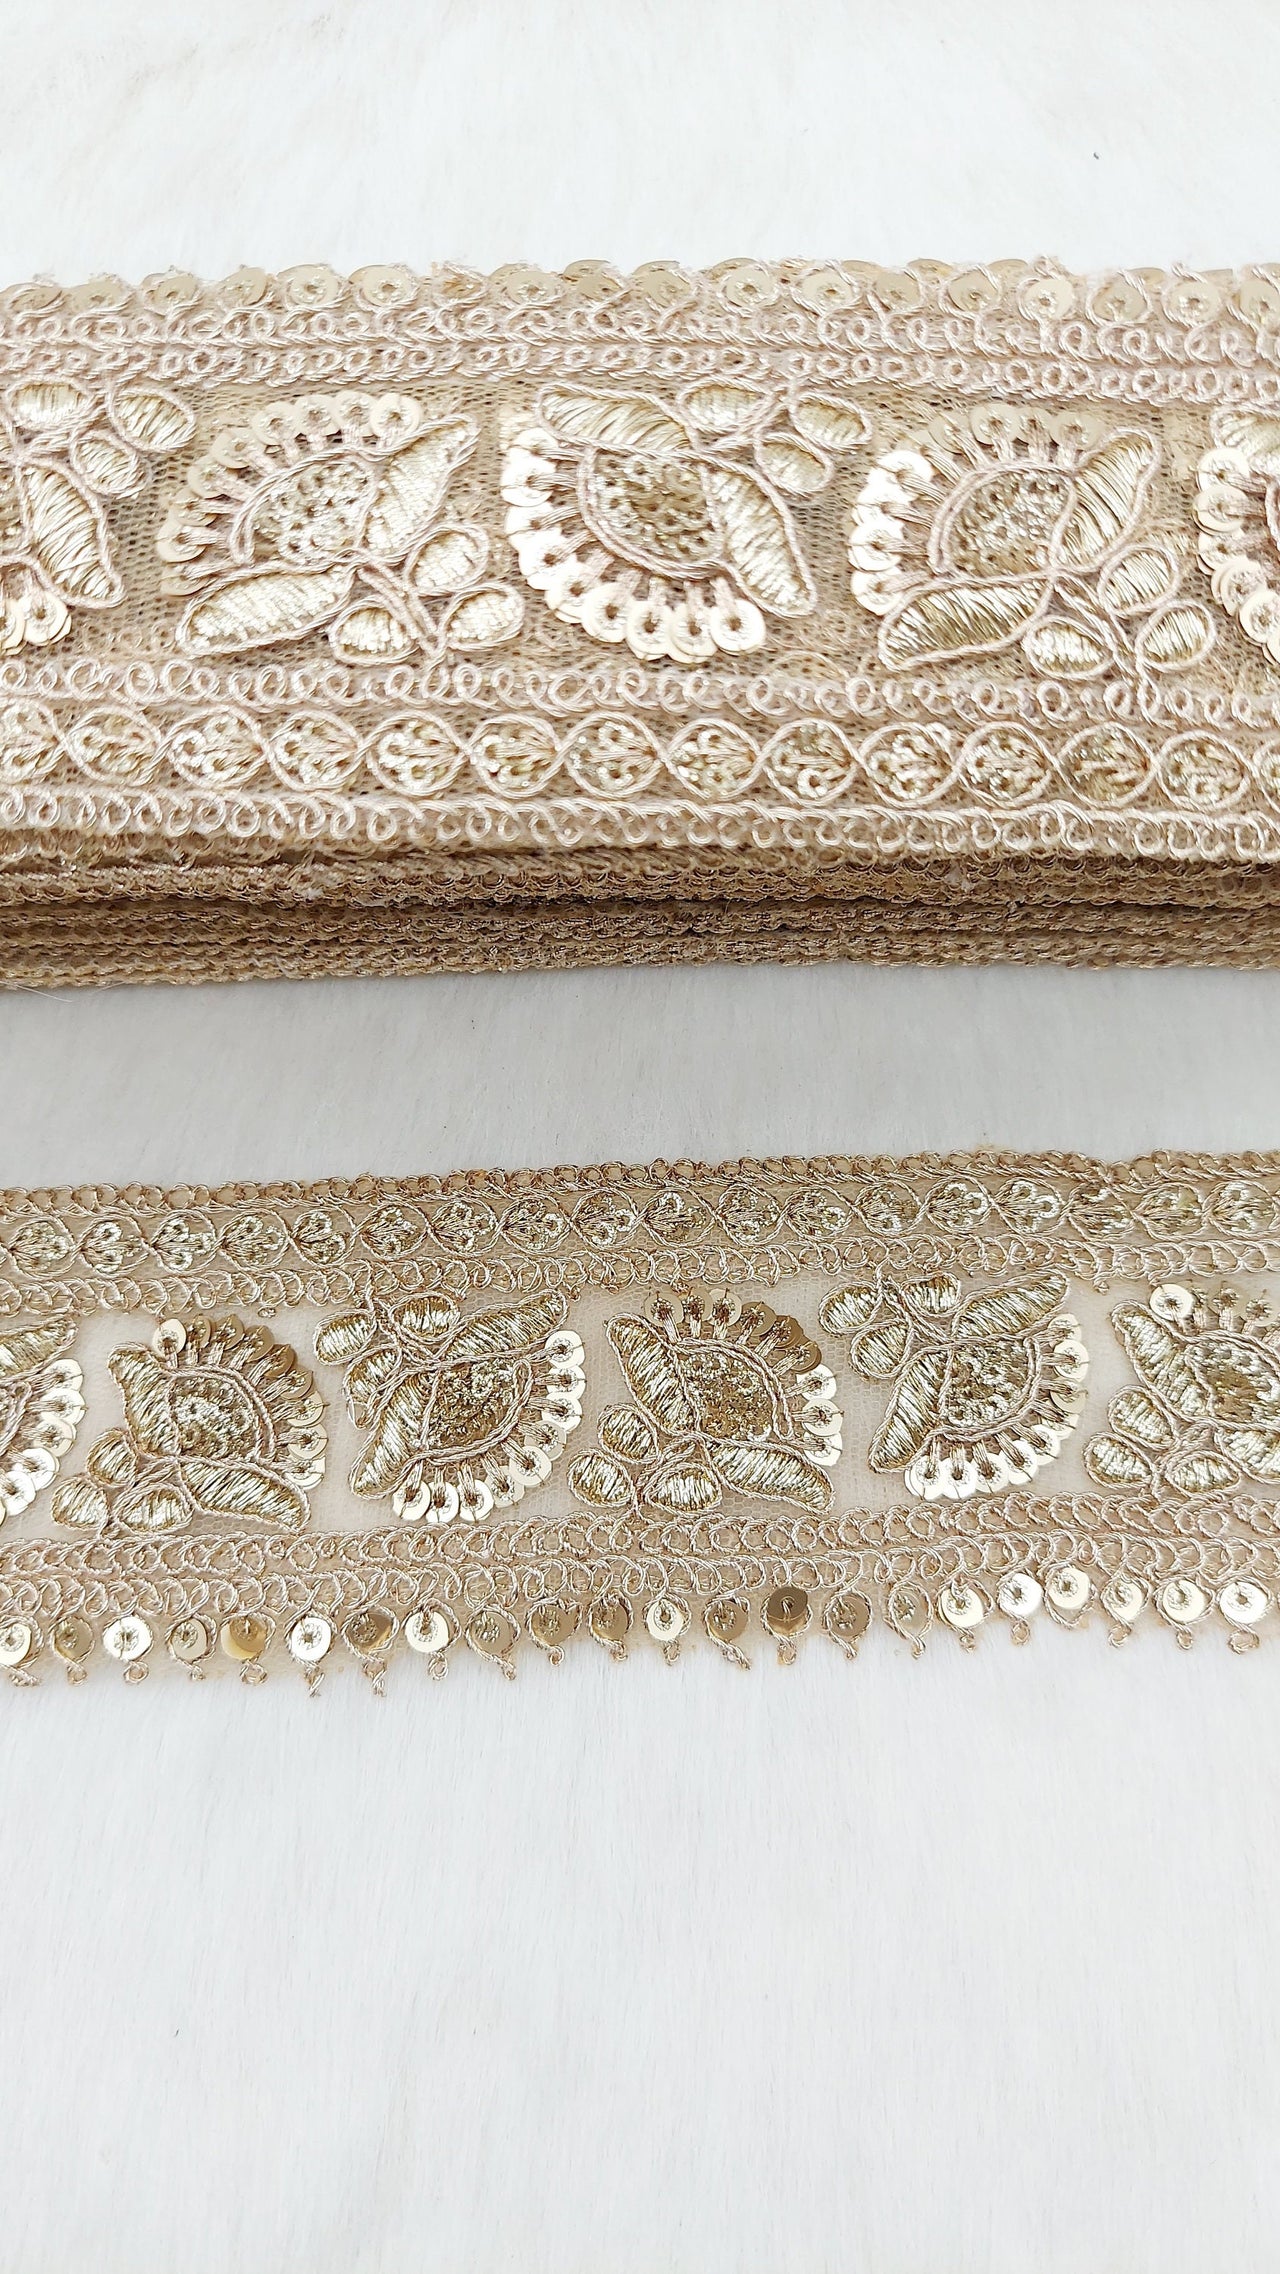 Gold Sequins Trim 2 Yards Decorative Floral Embroidered Lace Sari Border Costume Ribbon Crafting Sewing Tape